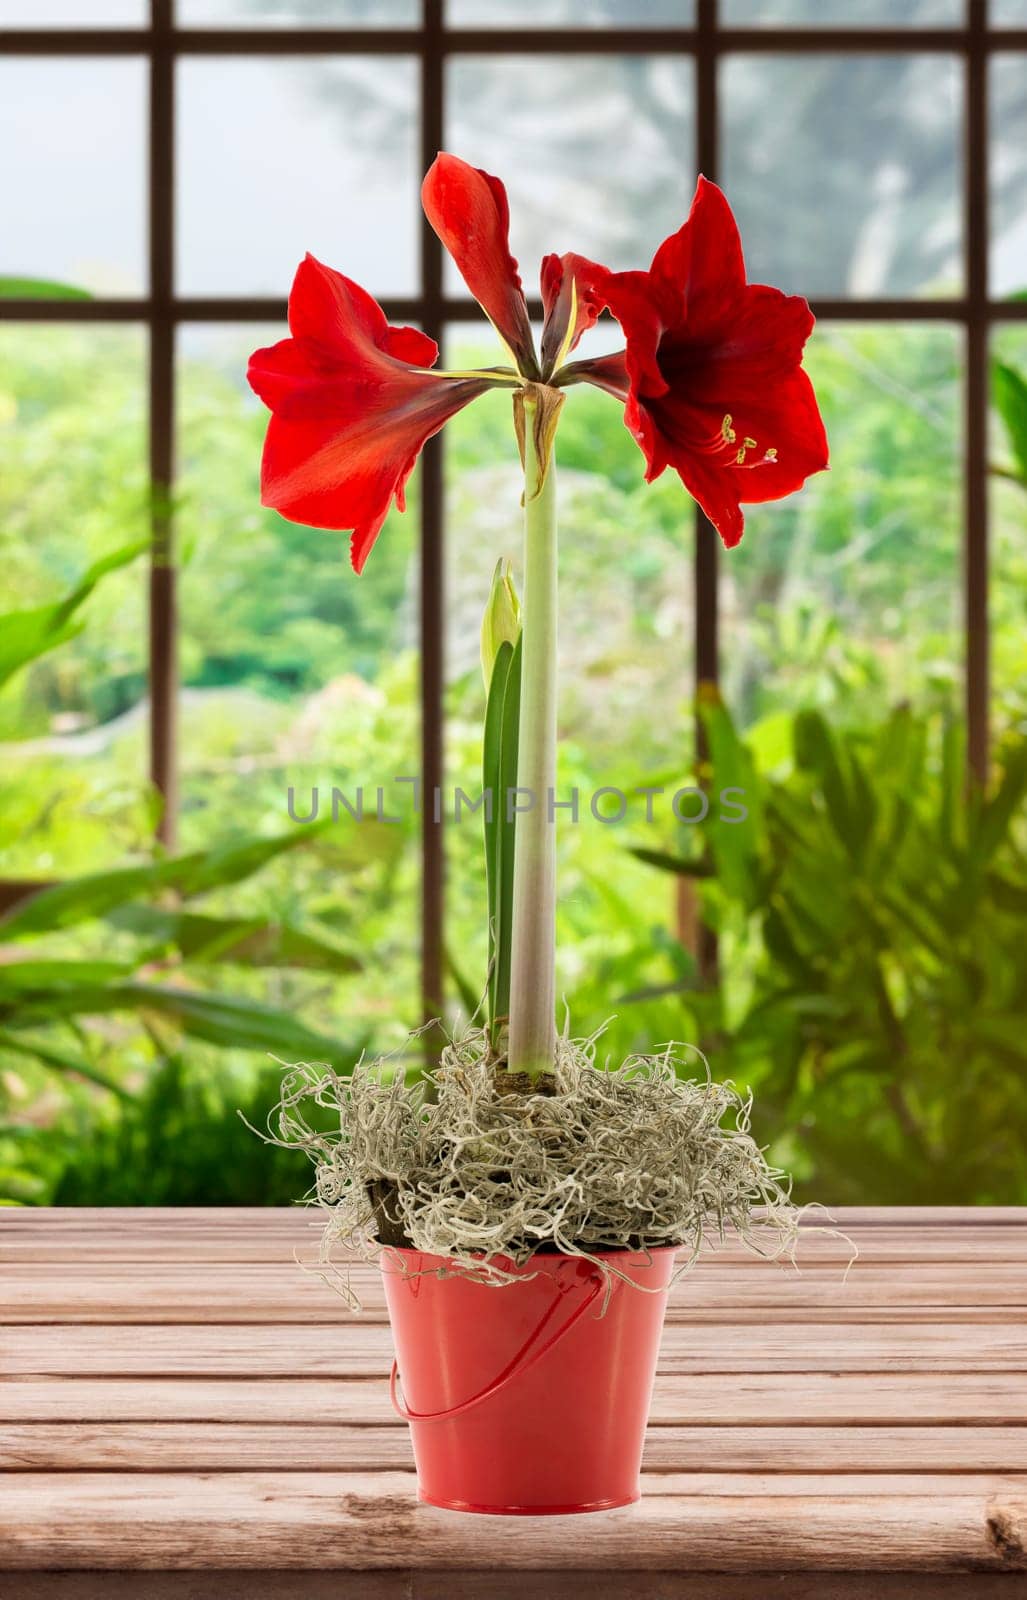 amaryllis red flower new life with garden background by compuinfoto